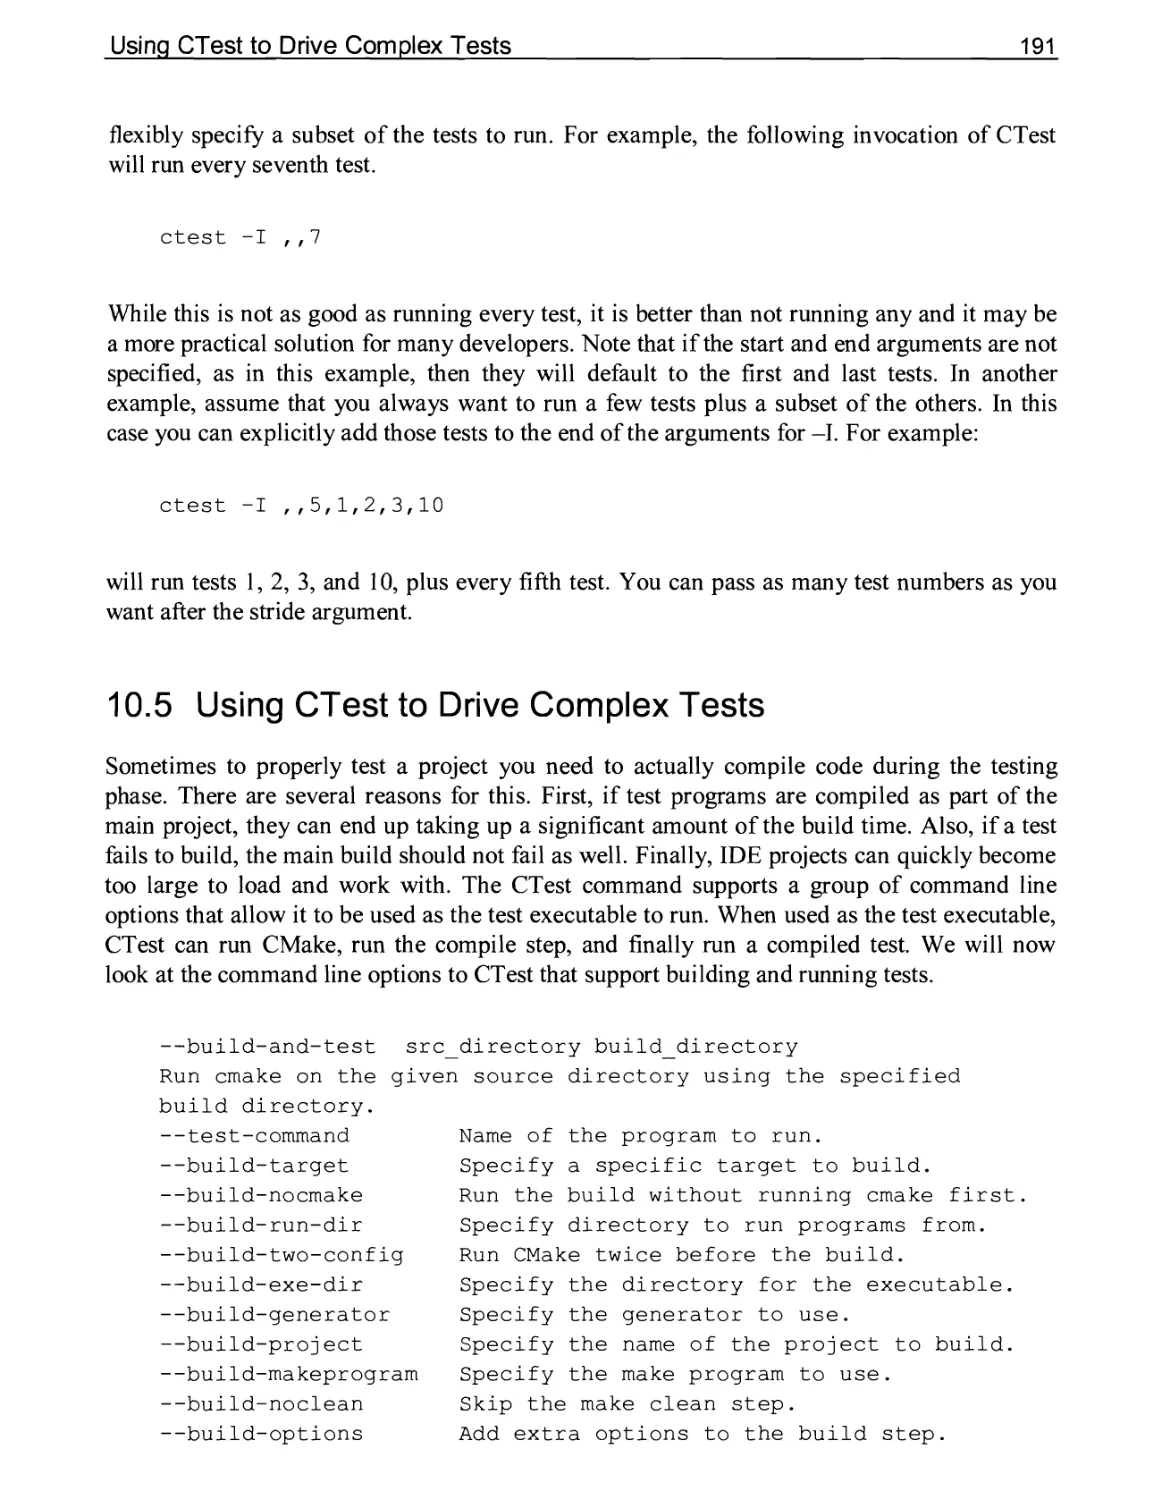 10.5 Using CTest to Drive Complex Tests